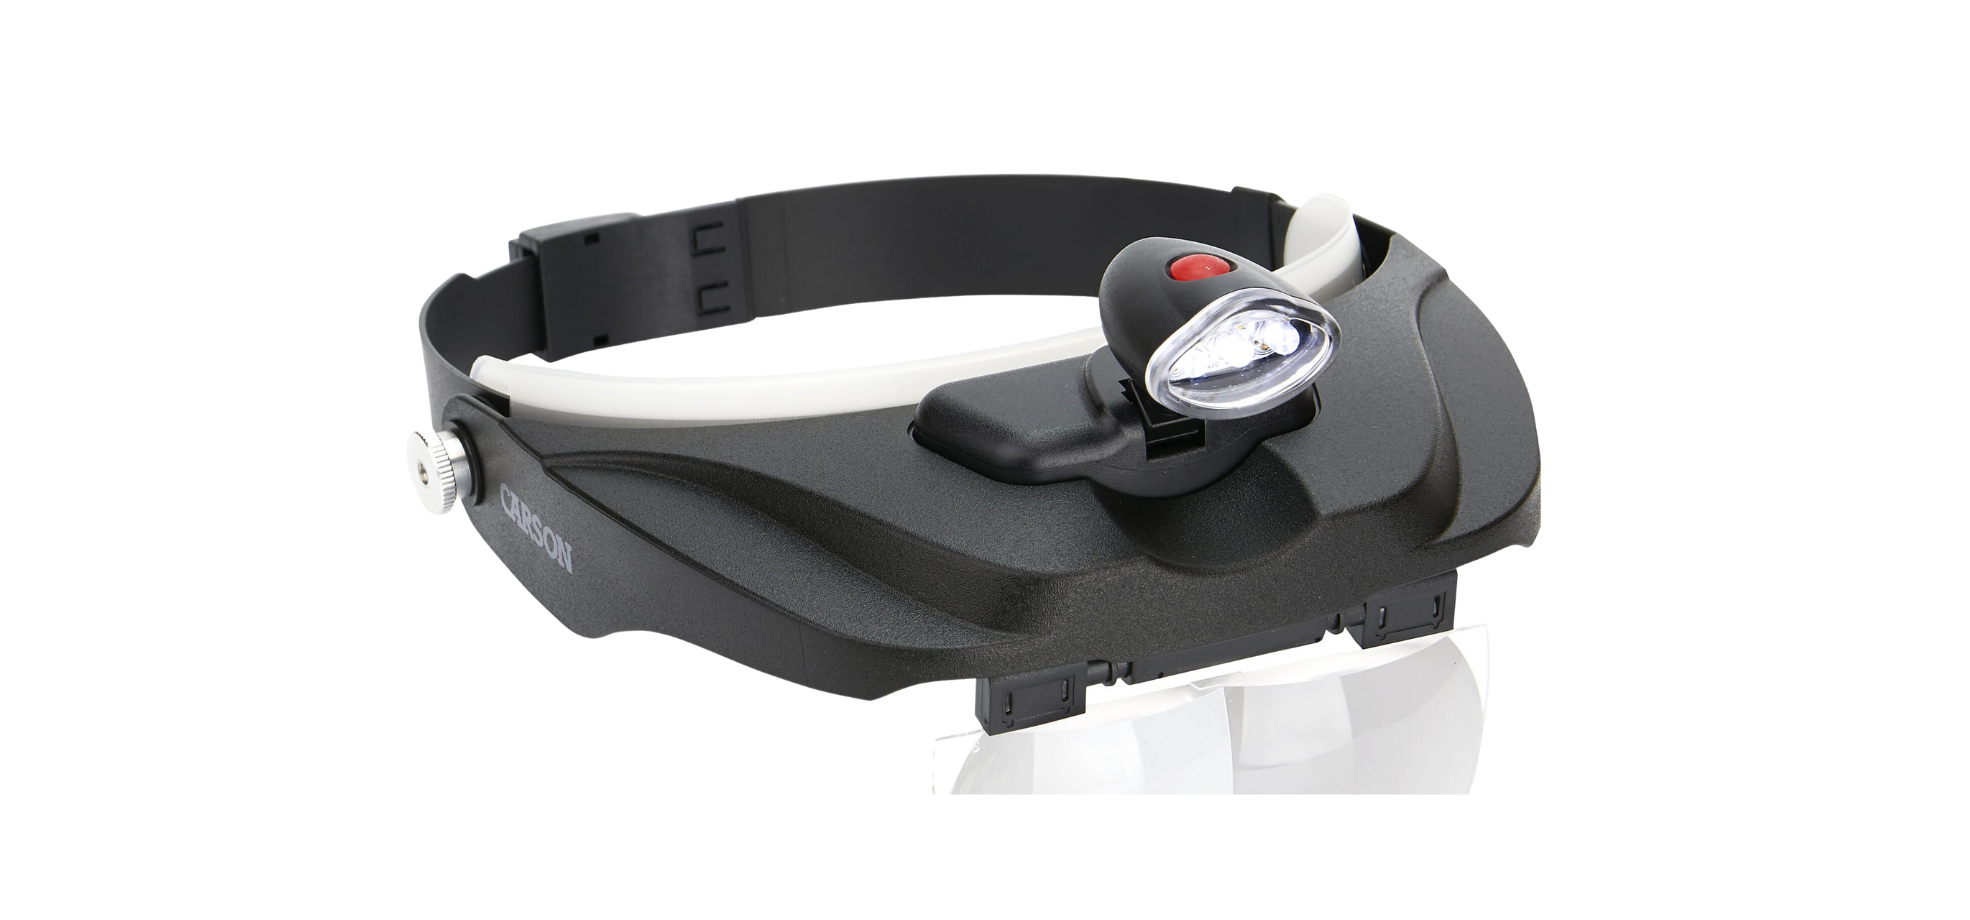 Image of the MagniVisor Magnifying Headlamp from Carson Optical